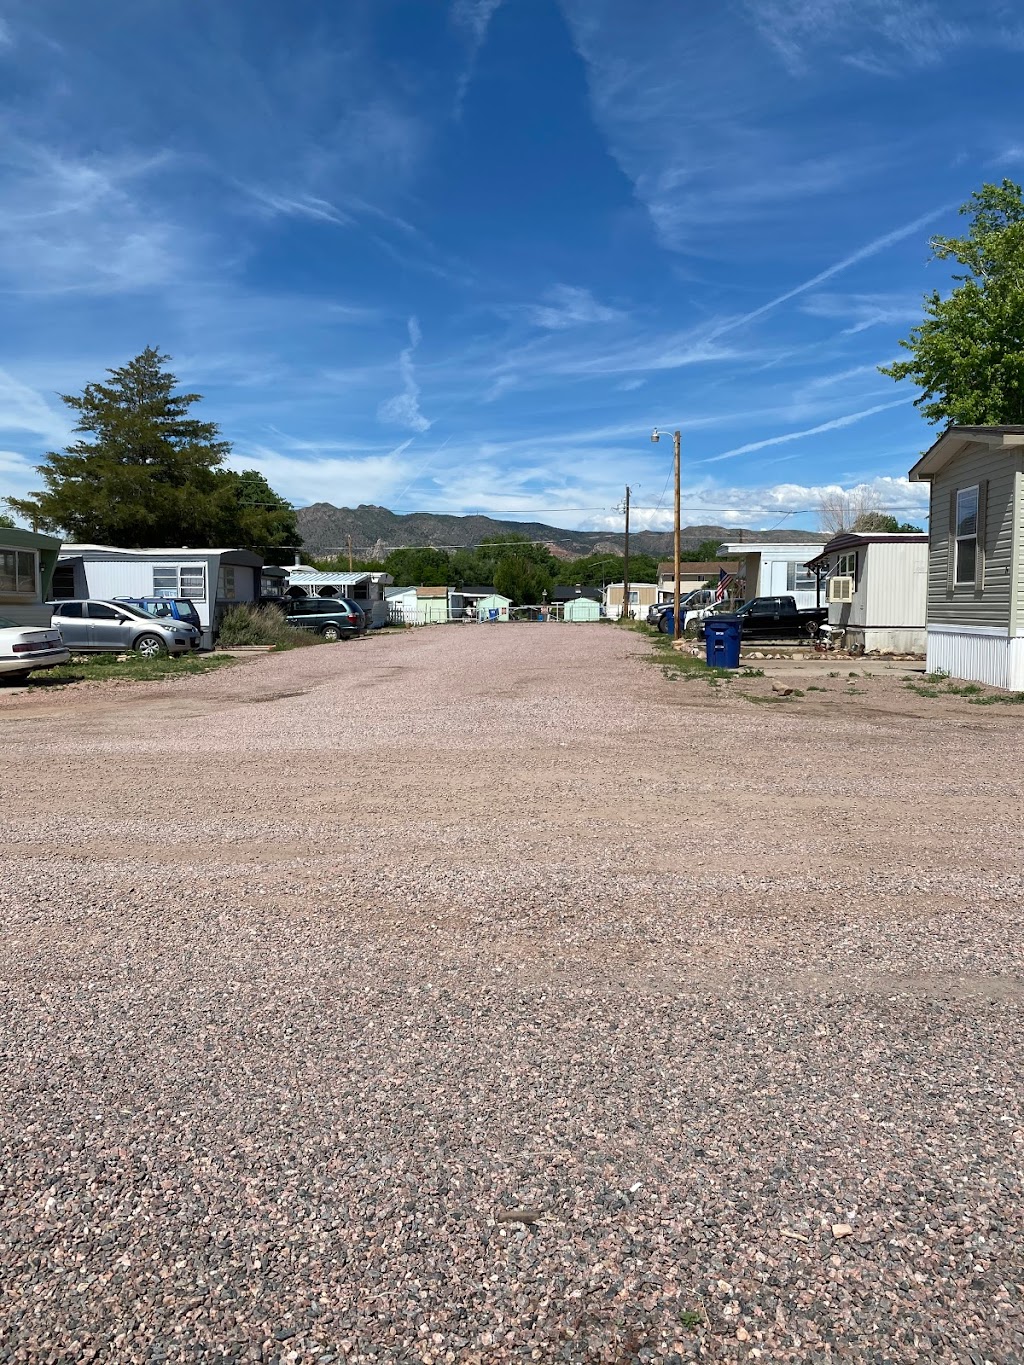 Central Manufactured Home Community | 2401 Central Ave, Cañon City, CO 81212, USA | Phone: (719) 458-1673